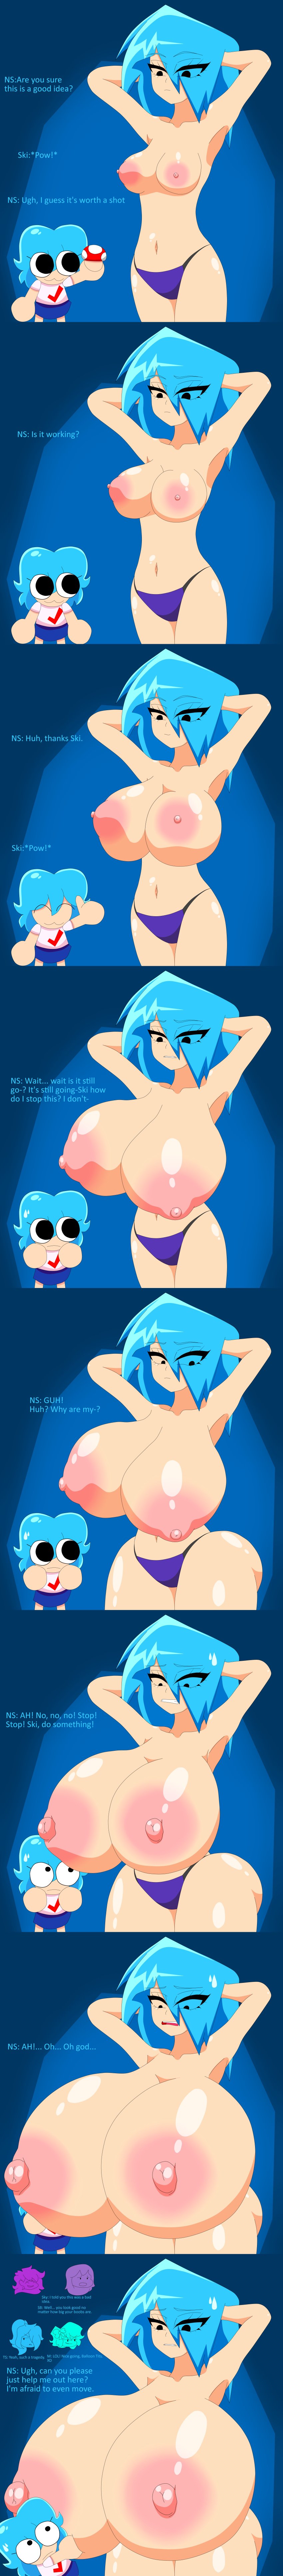 aqua_hair big_ass big_breasts blue_panties breast_inflation english_text fnf_icons friday_night_funkin friday_night_funkin_mod gigantic_ass gigantic_breasts miko_(friday_night_funkin) nervous nusky_(friday_night_funkin) scared ski_(friday_night_funkin) sky_(friday_night_funkin) skyblue trusky_(friday_night_funkin) xml_xrossover_(artist)